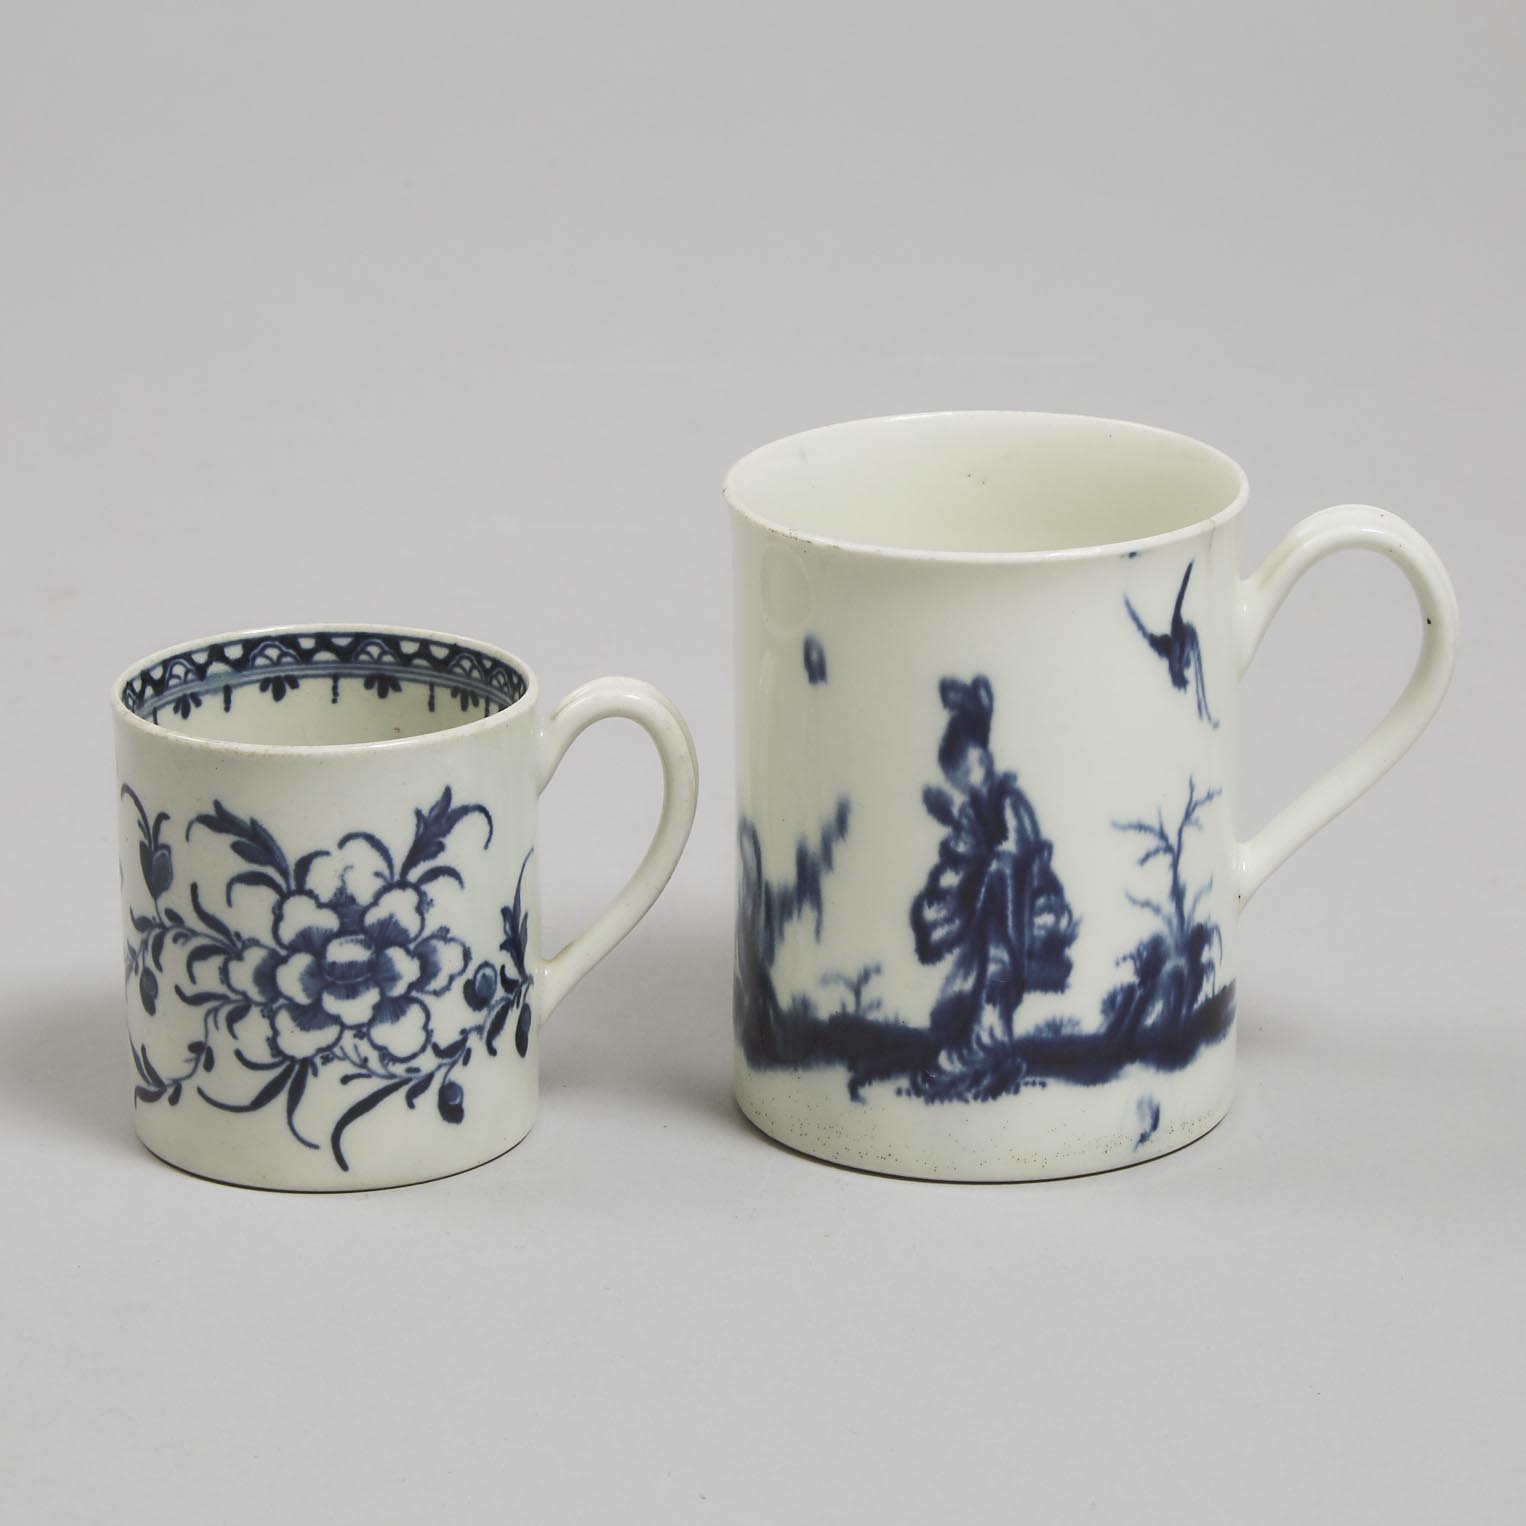 Worcester 'Walk in the Garden' and 'Peony' Pattern Mugs, c.1760-70